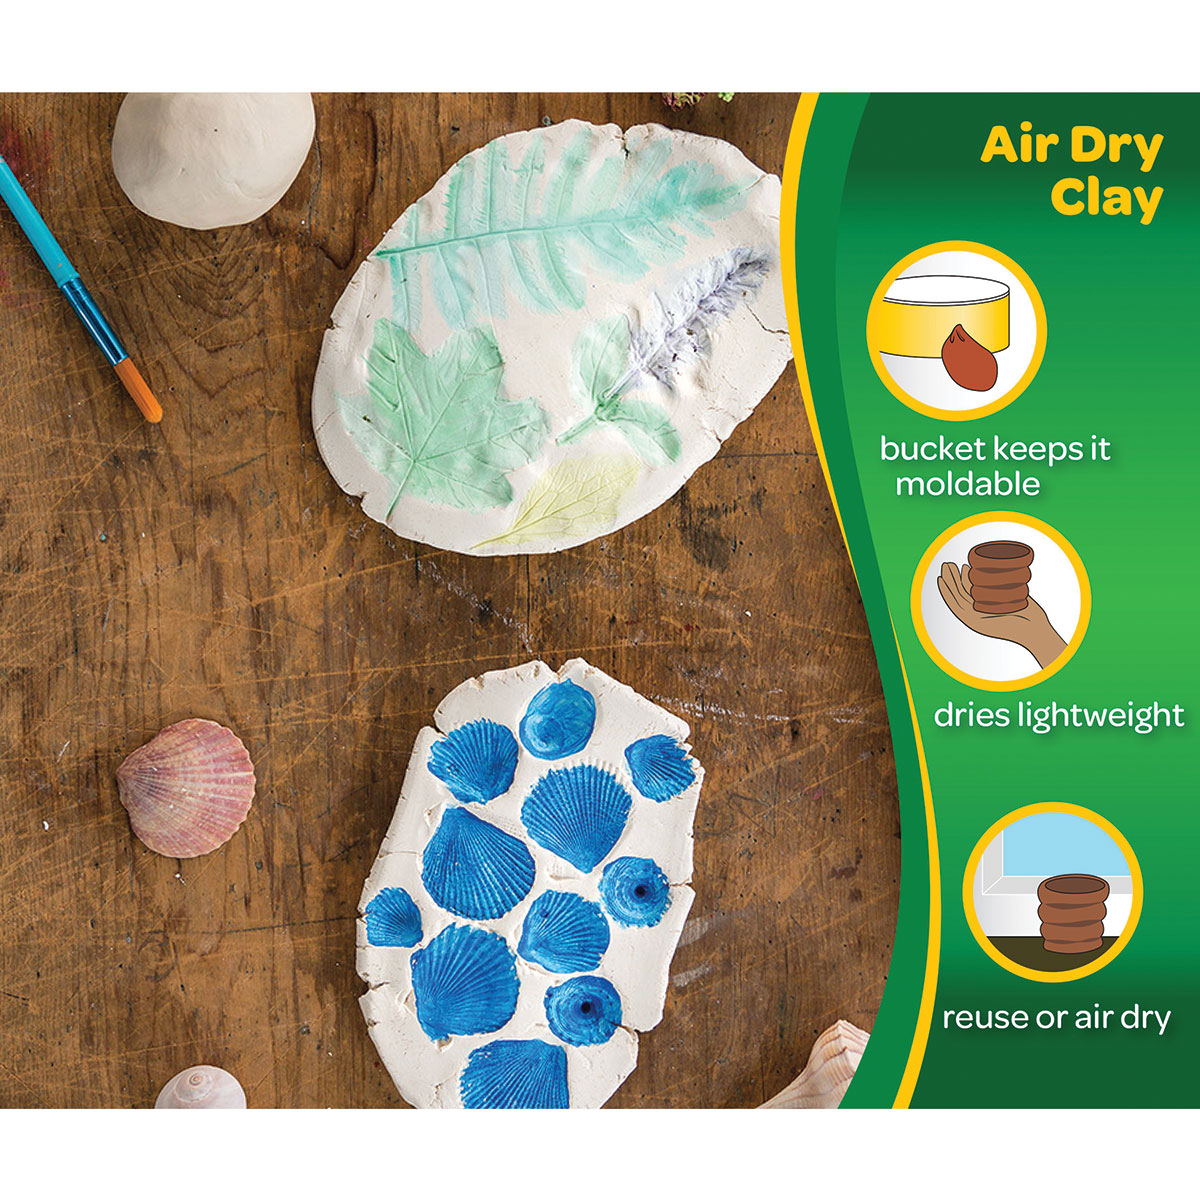 Moist Modeling Clay Value Pack, 25 lbs.